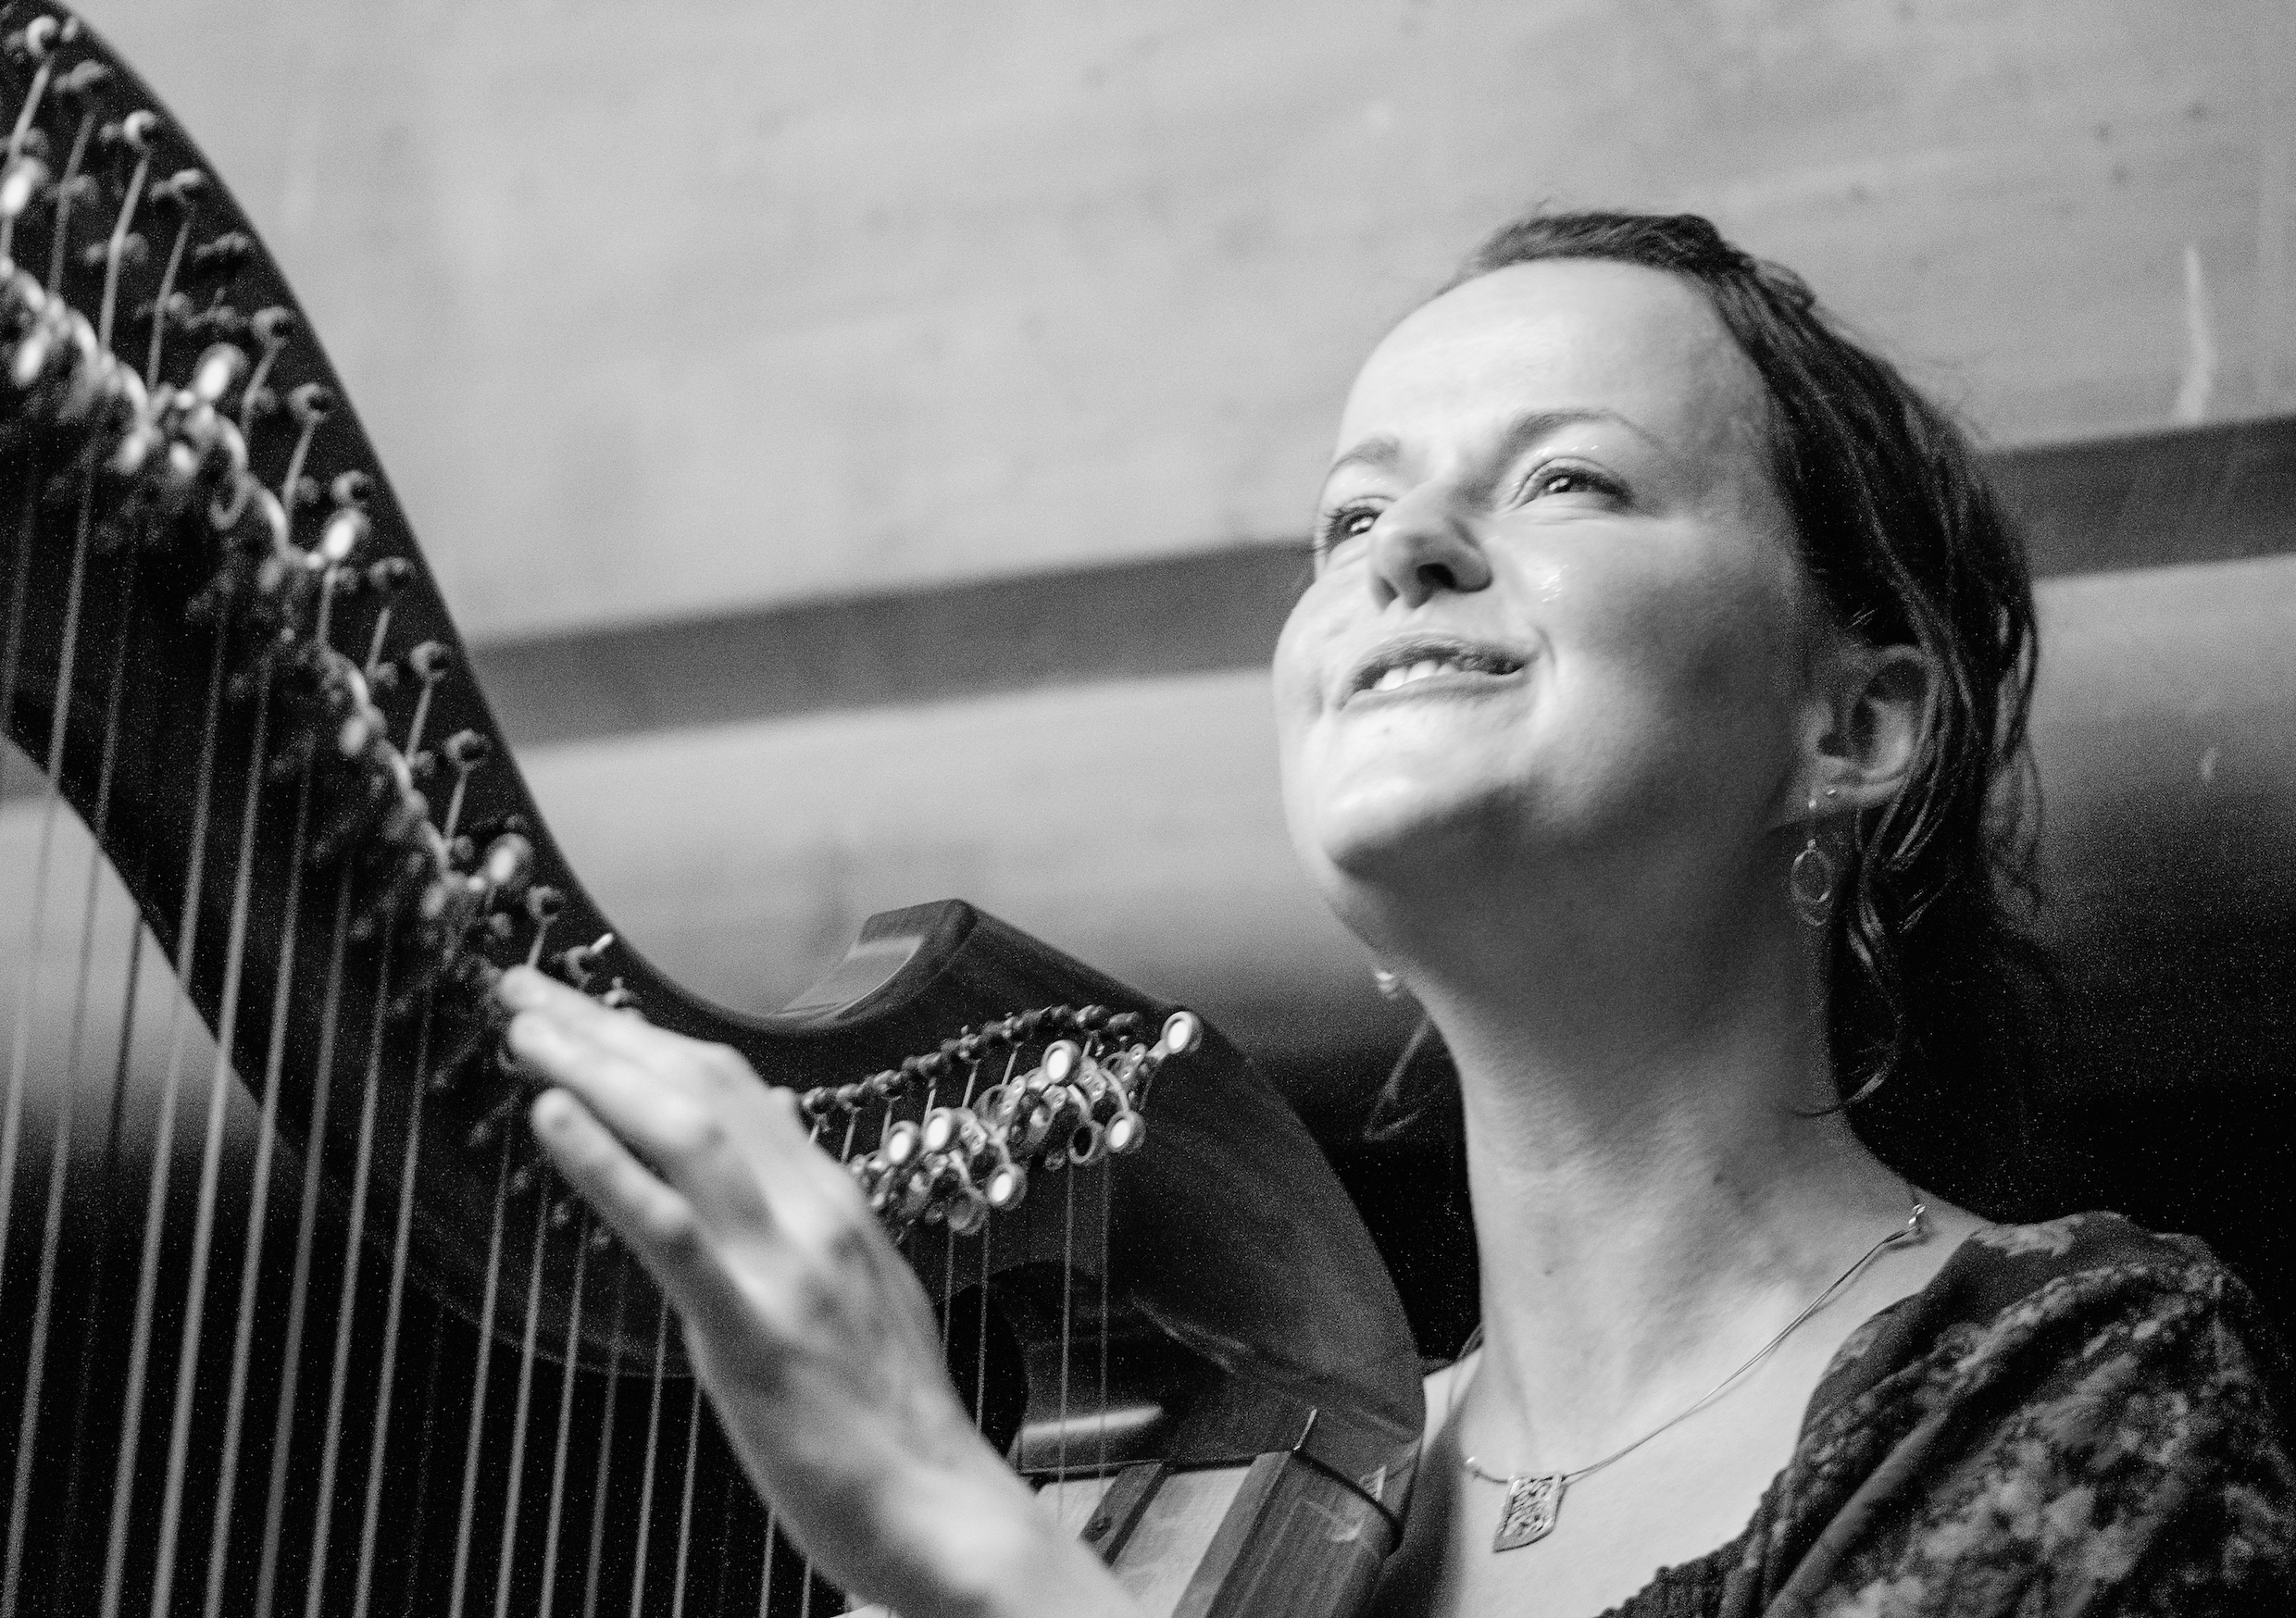 Harpist Gillian Fleetwood will perform at this year's festival.